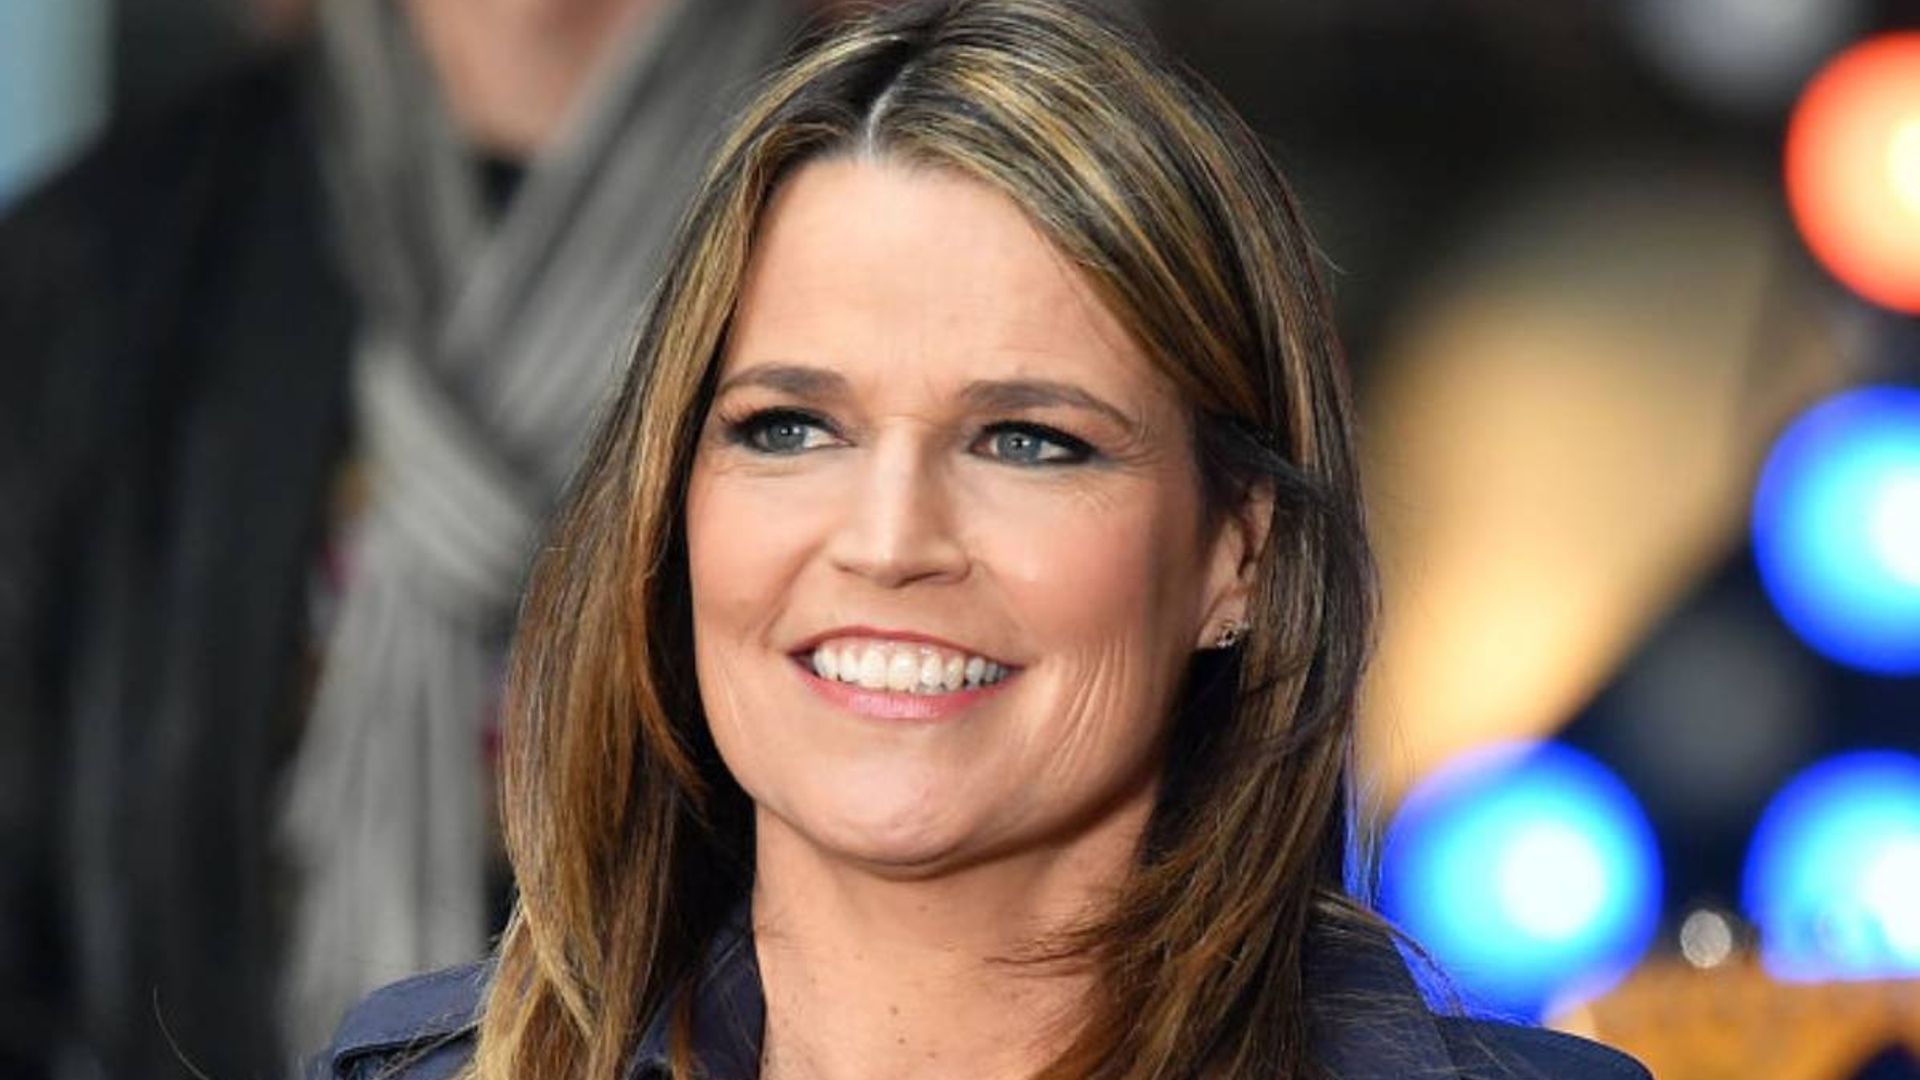 Savannah Guthrie's children are growing up fast in new family photo during time away from Today